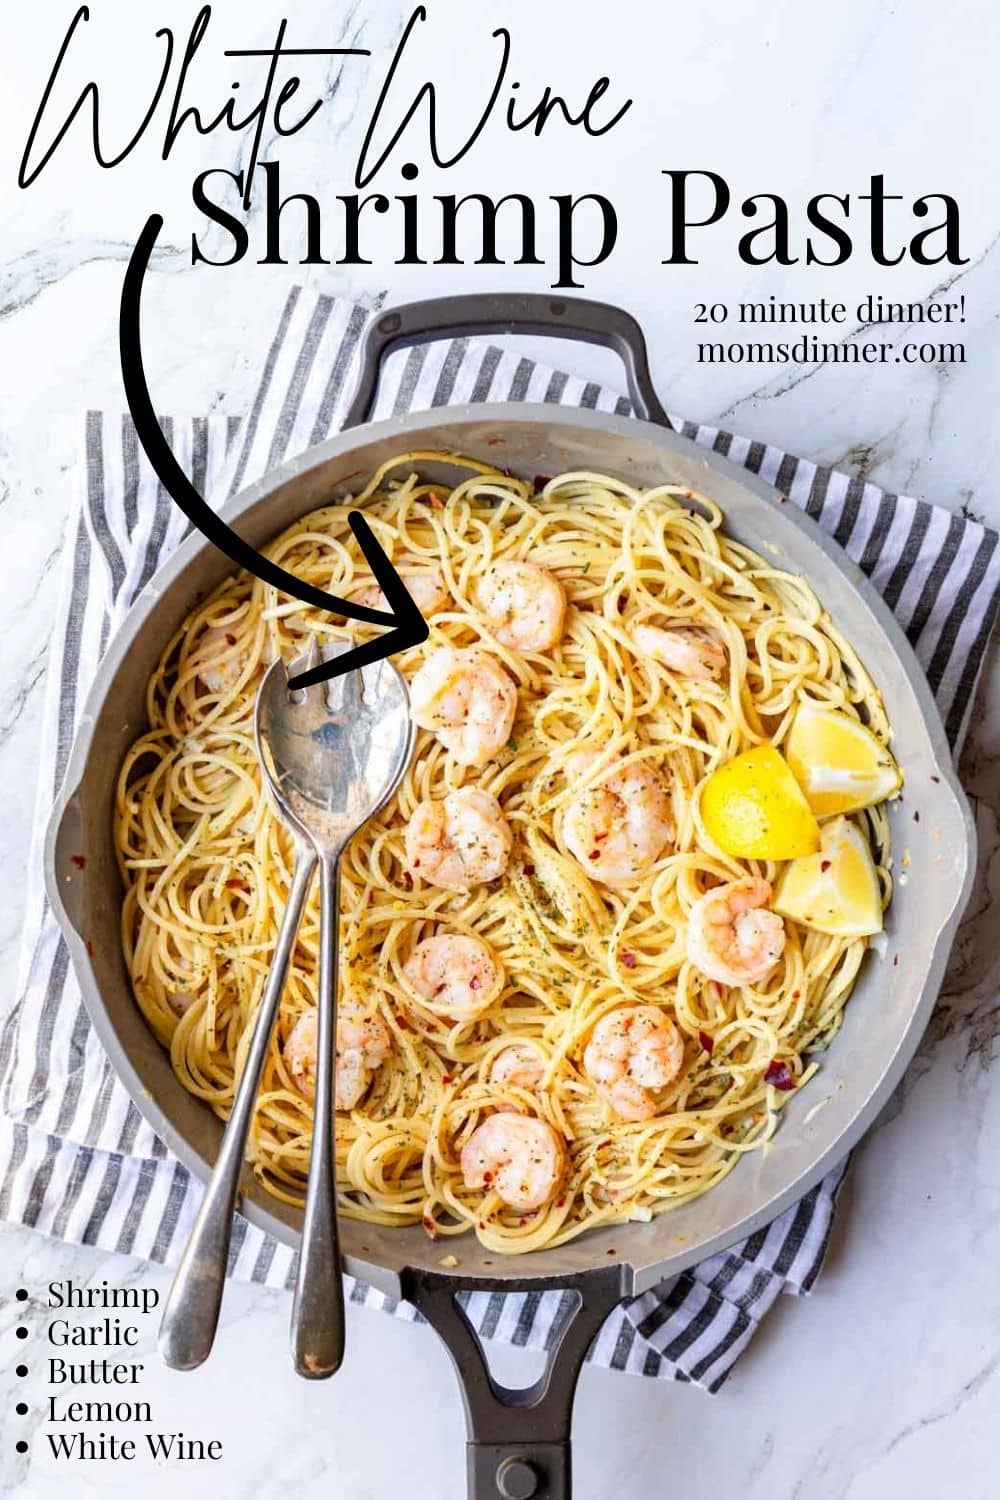 a skillet of pasta with shrimp in a white wine garlic sauce, with lemon wedges on the side.